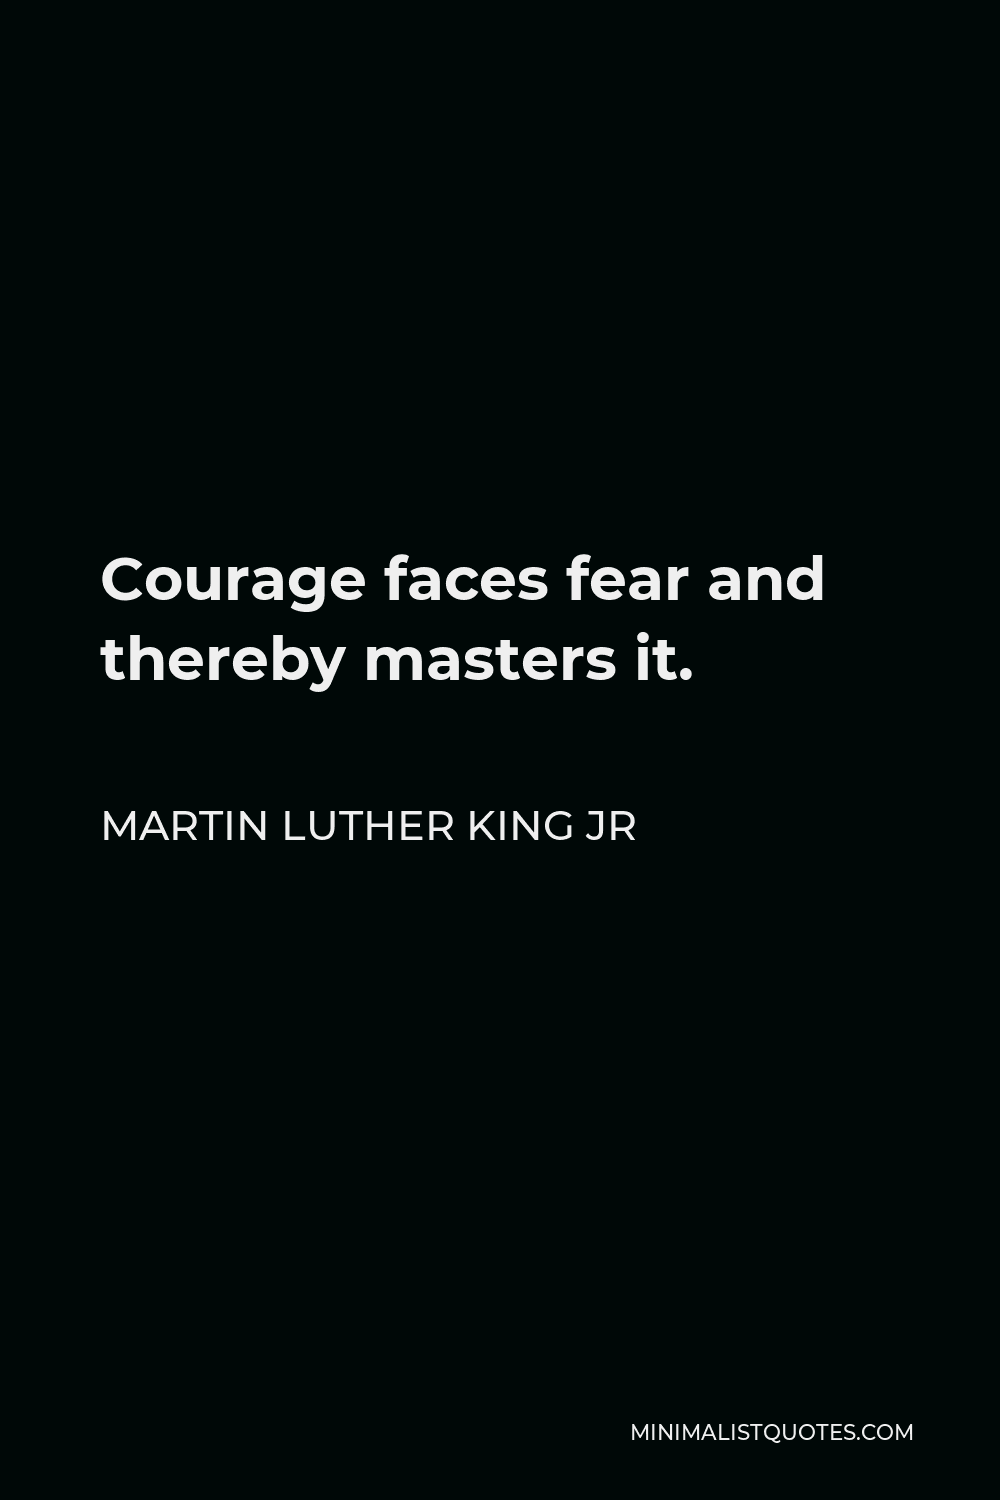 Martin Luther King Jr Quote: Courage faces fear and thereby masters it.